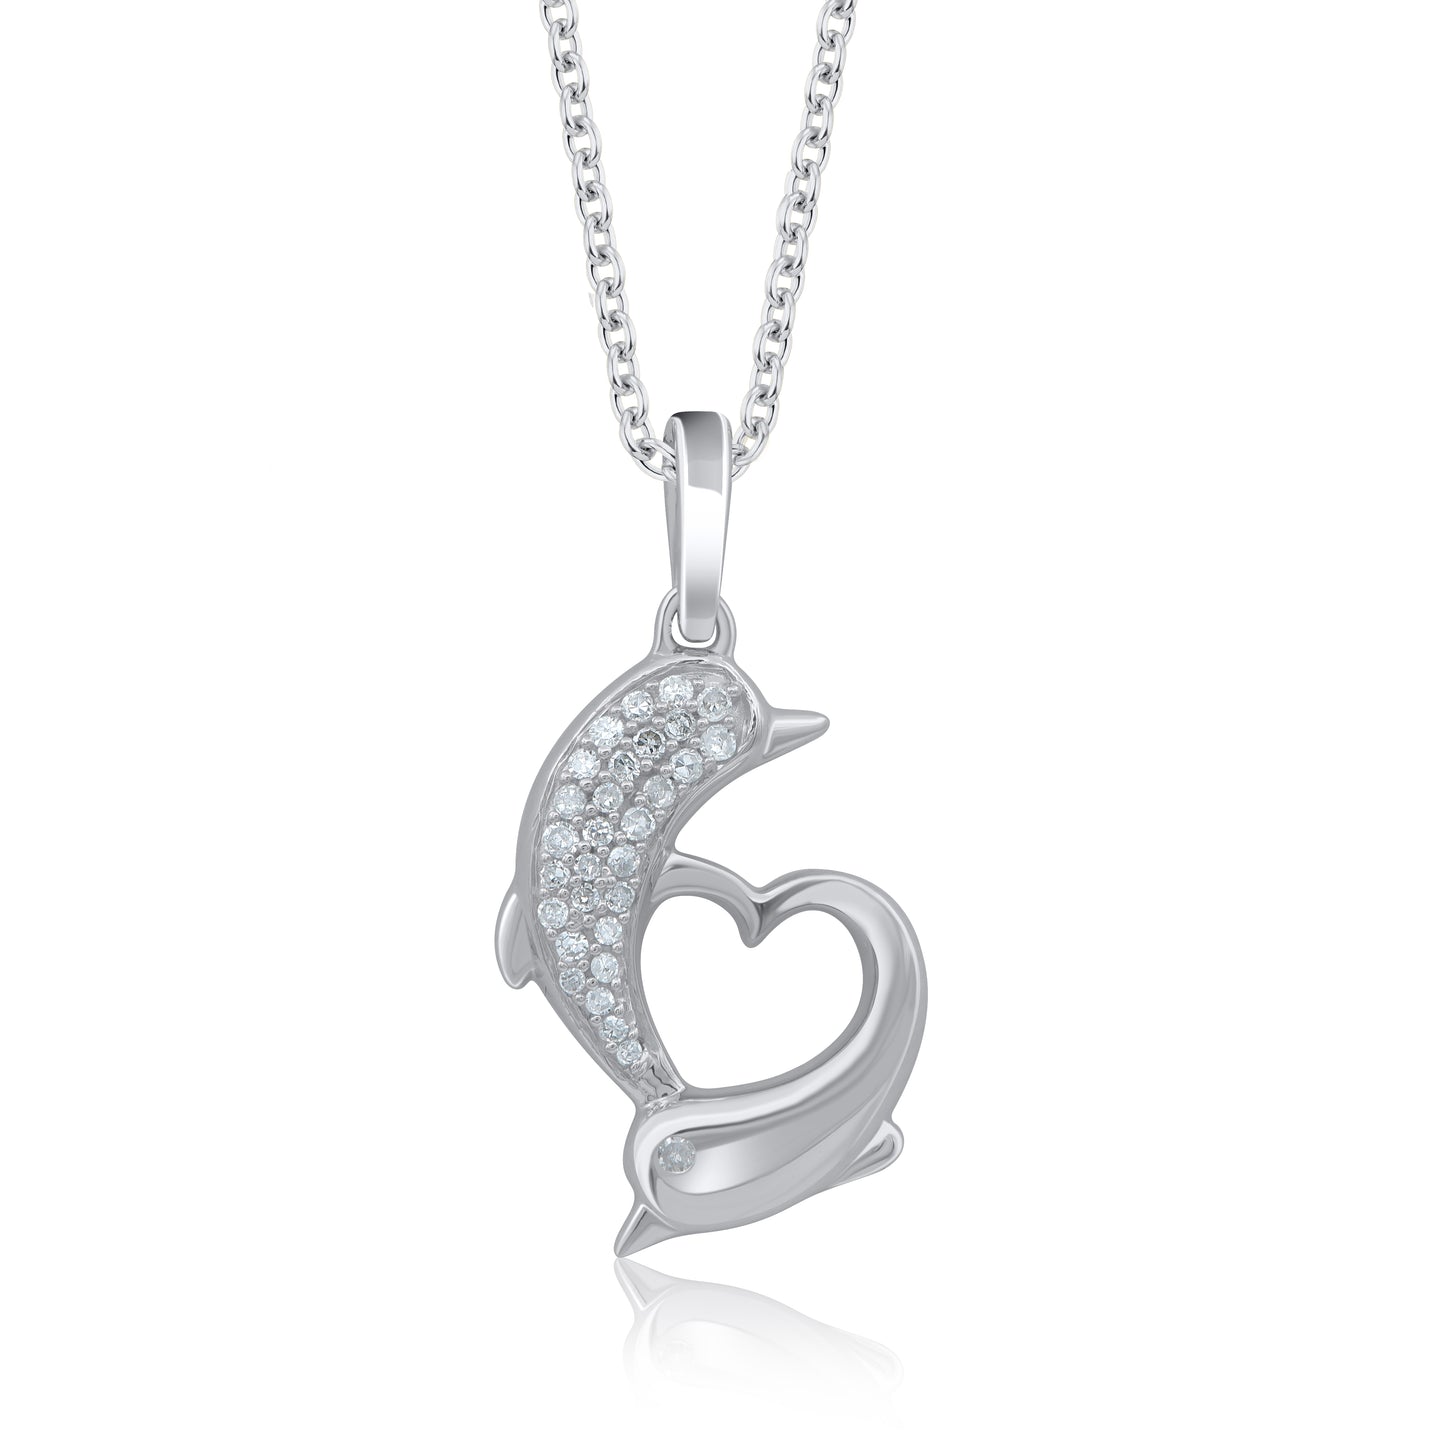 Dolphin Heart Pendant Necklace in 925 Sterling Silver